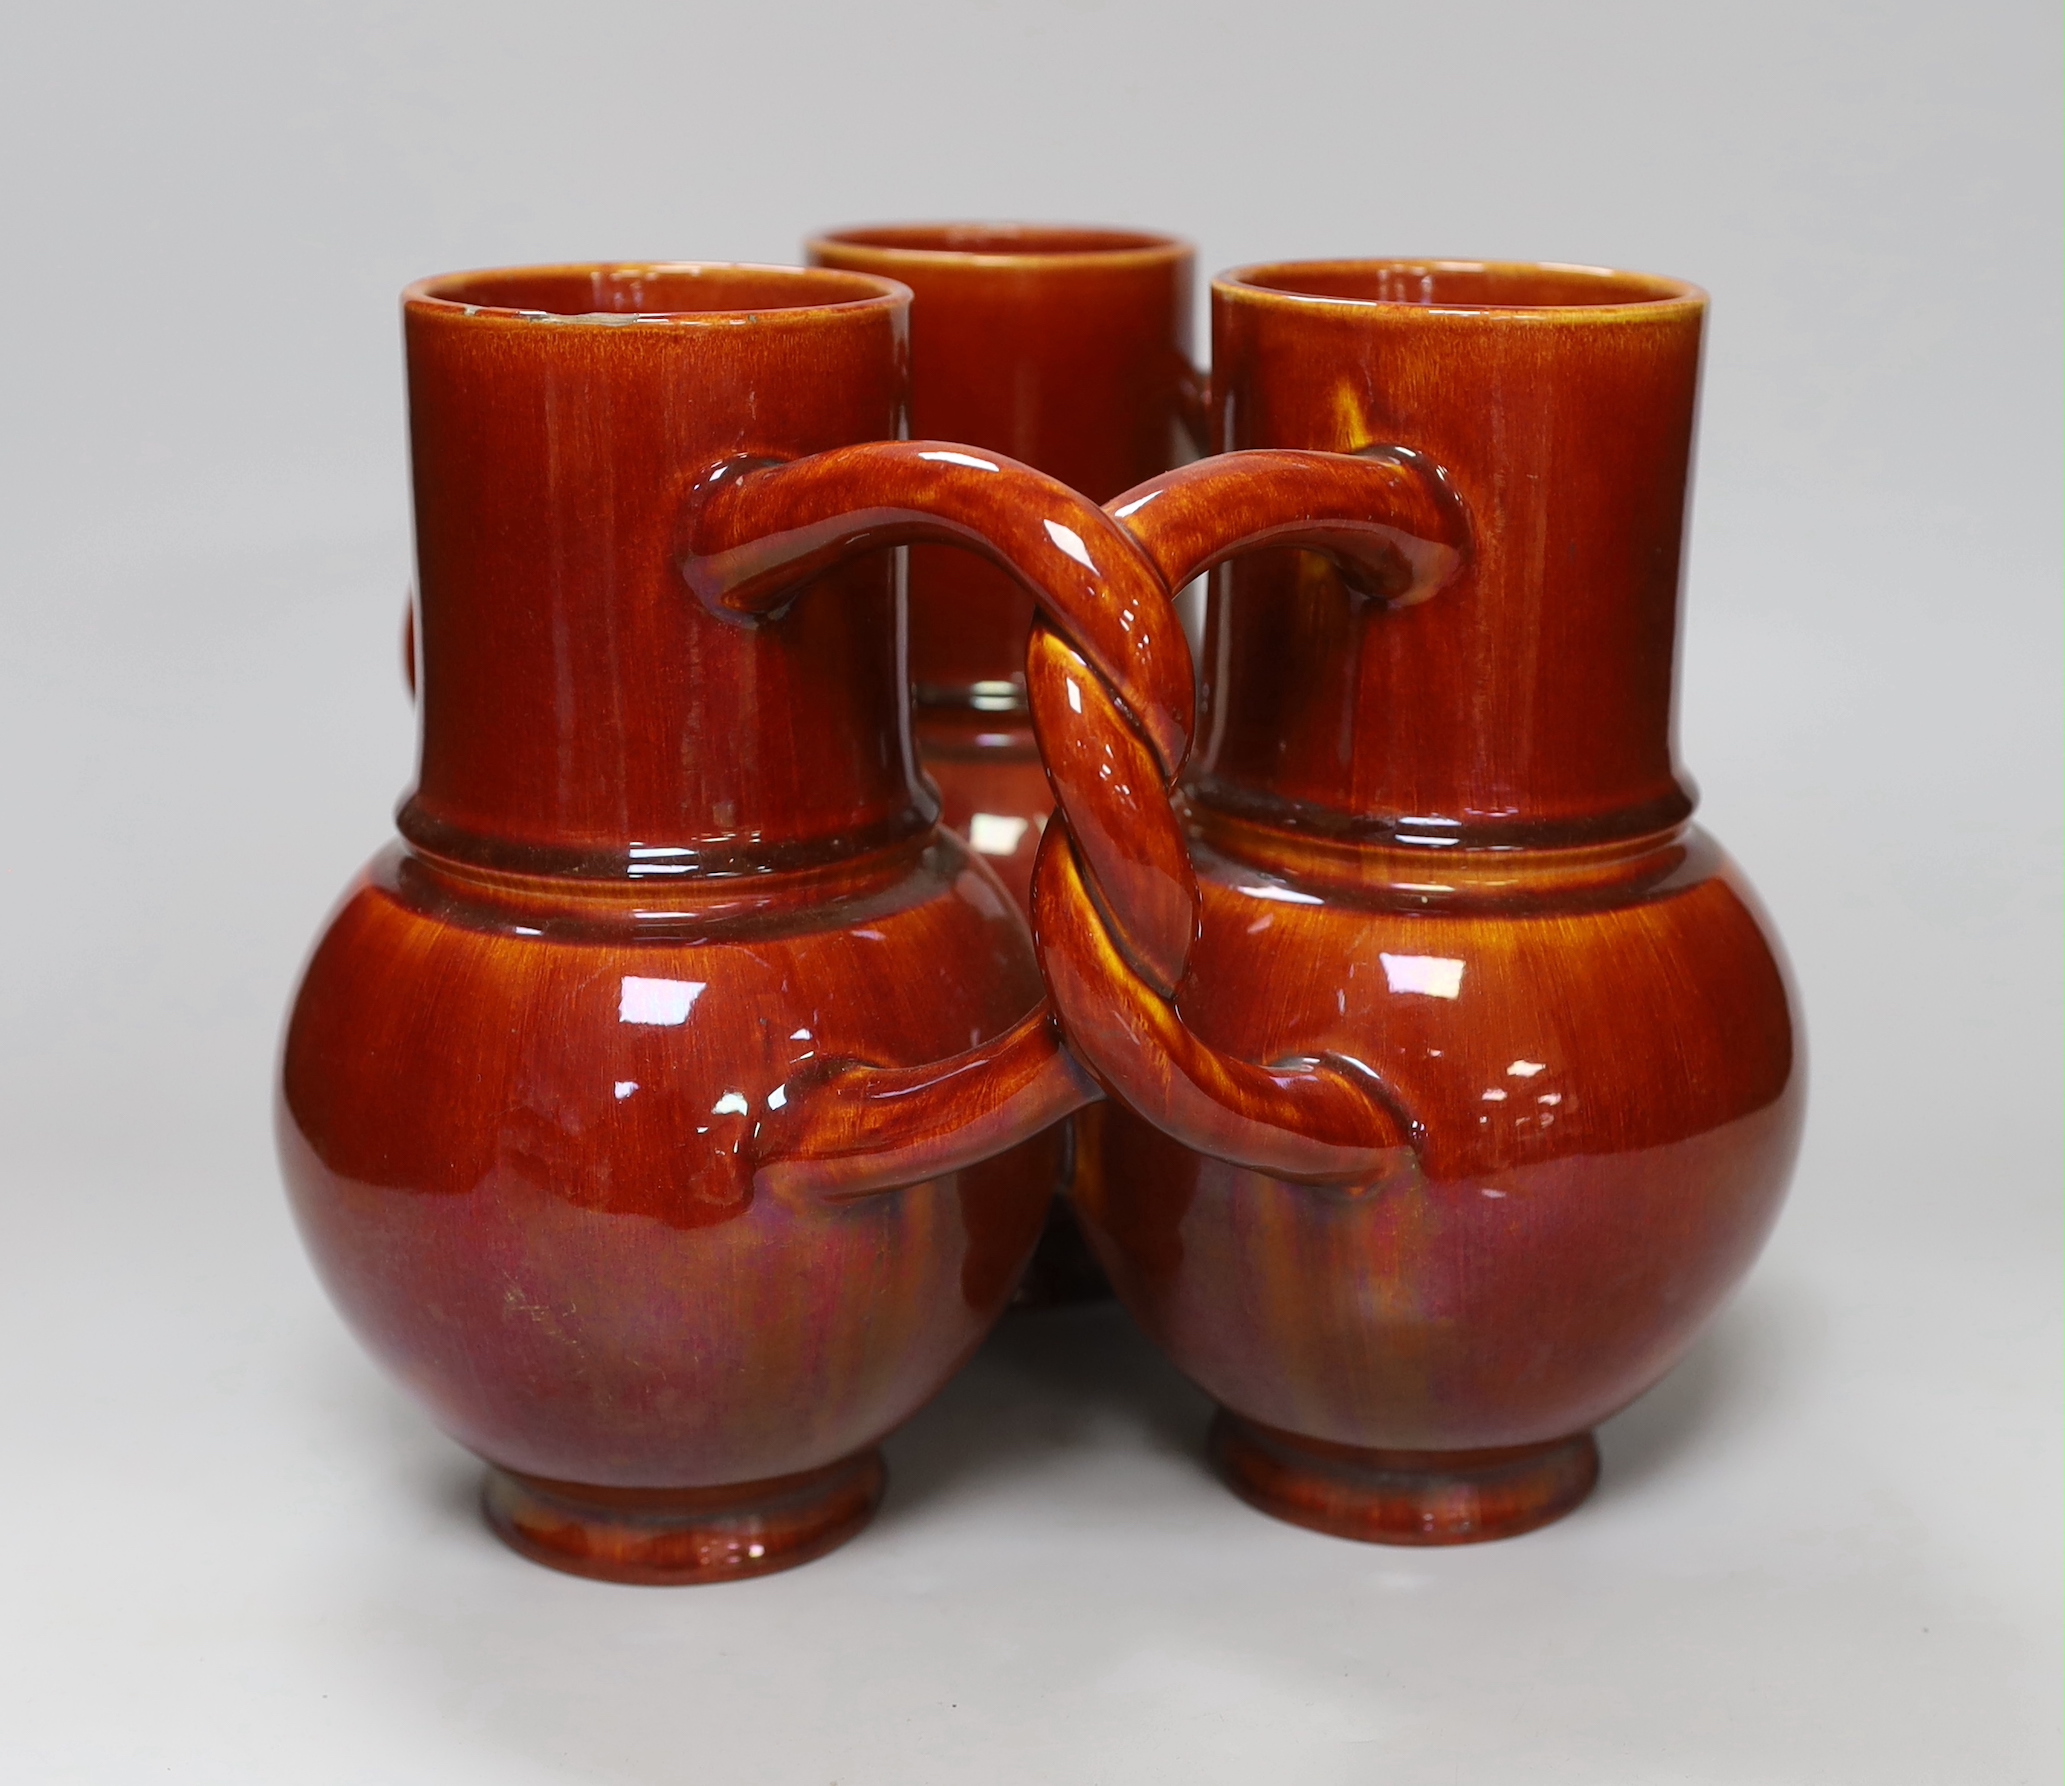 A Burmantofts Pottery three section fuddling cup with interwoven handles in dark burnt orange, - Image 3 of 6